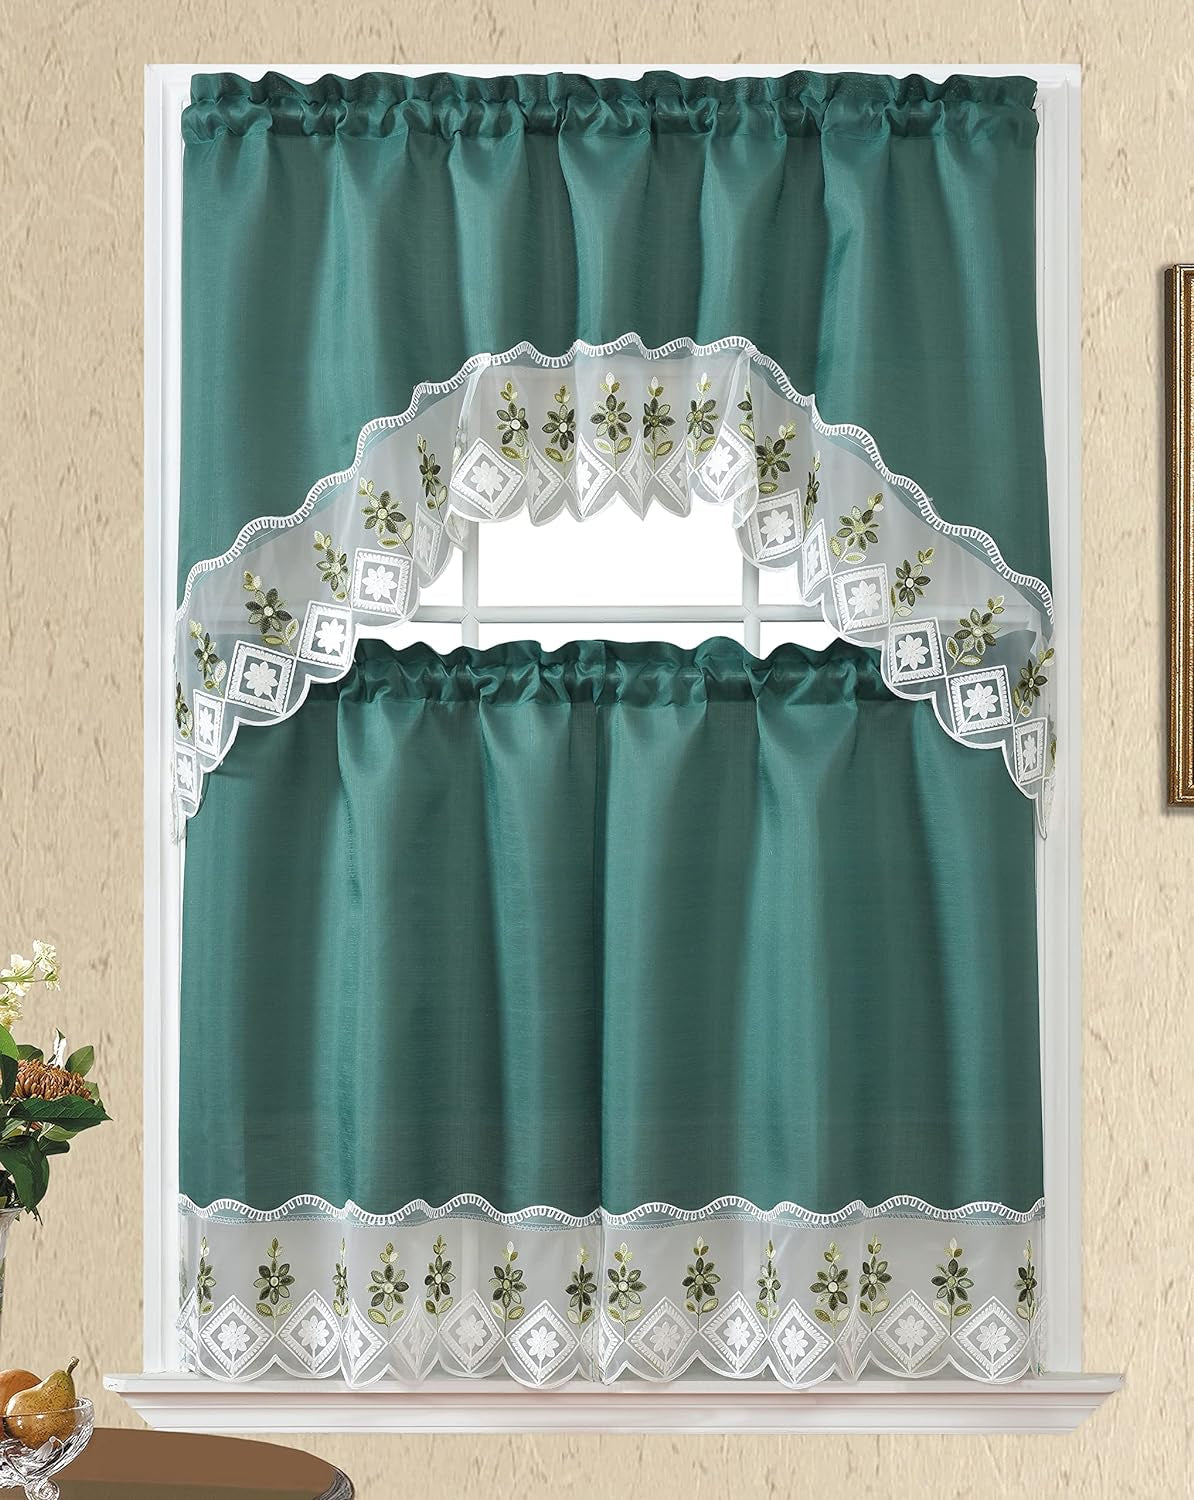 GOHD Blossom in Snow Kitchen Tiers Curtain, 3PCS Kitchen Curtains and Valances Set, Grey Fabric with Grey Flower Embroidery and White Lace. (Grey, Swag and 34.5 Inches Tiers Set)